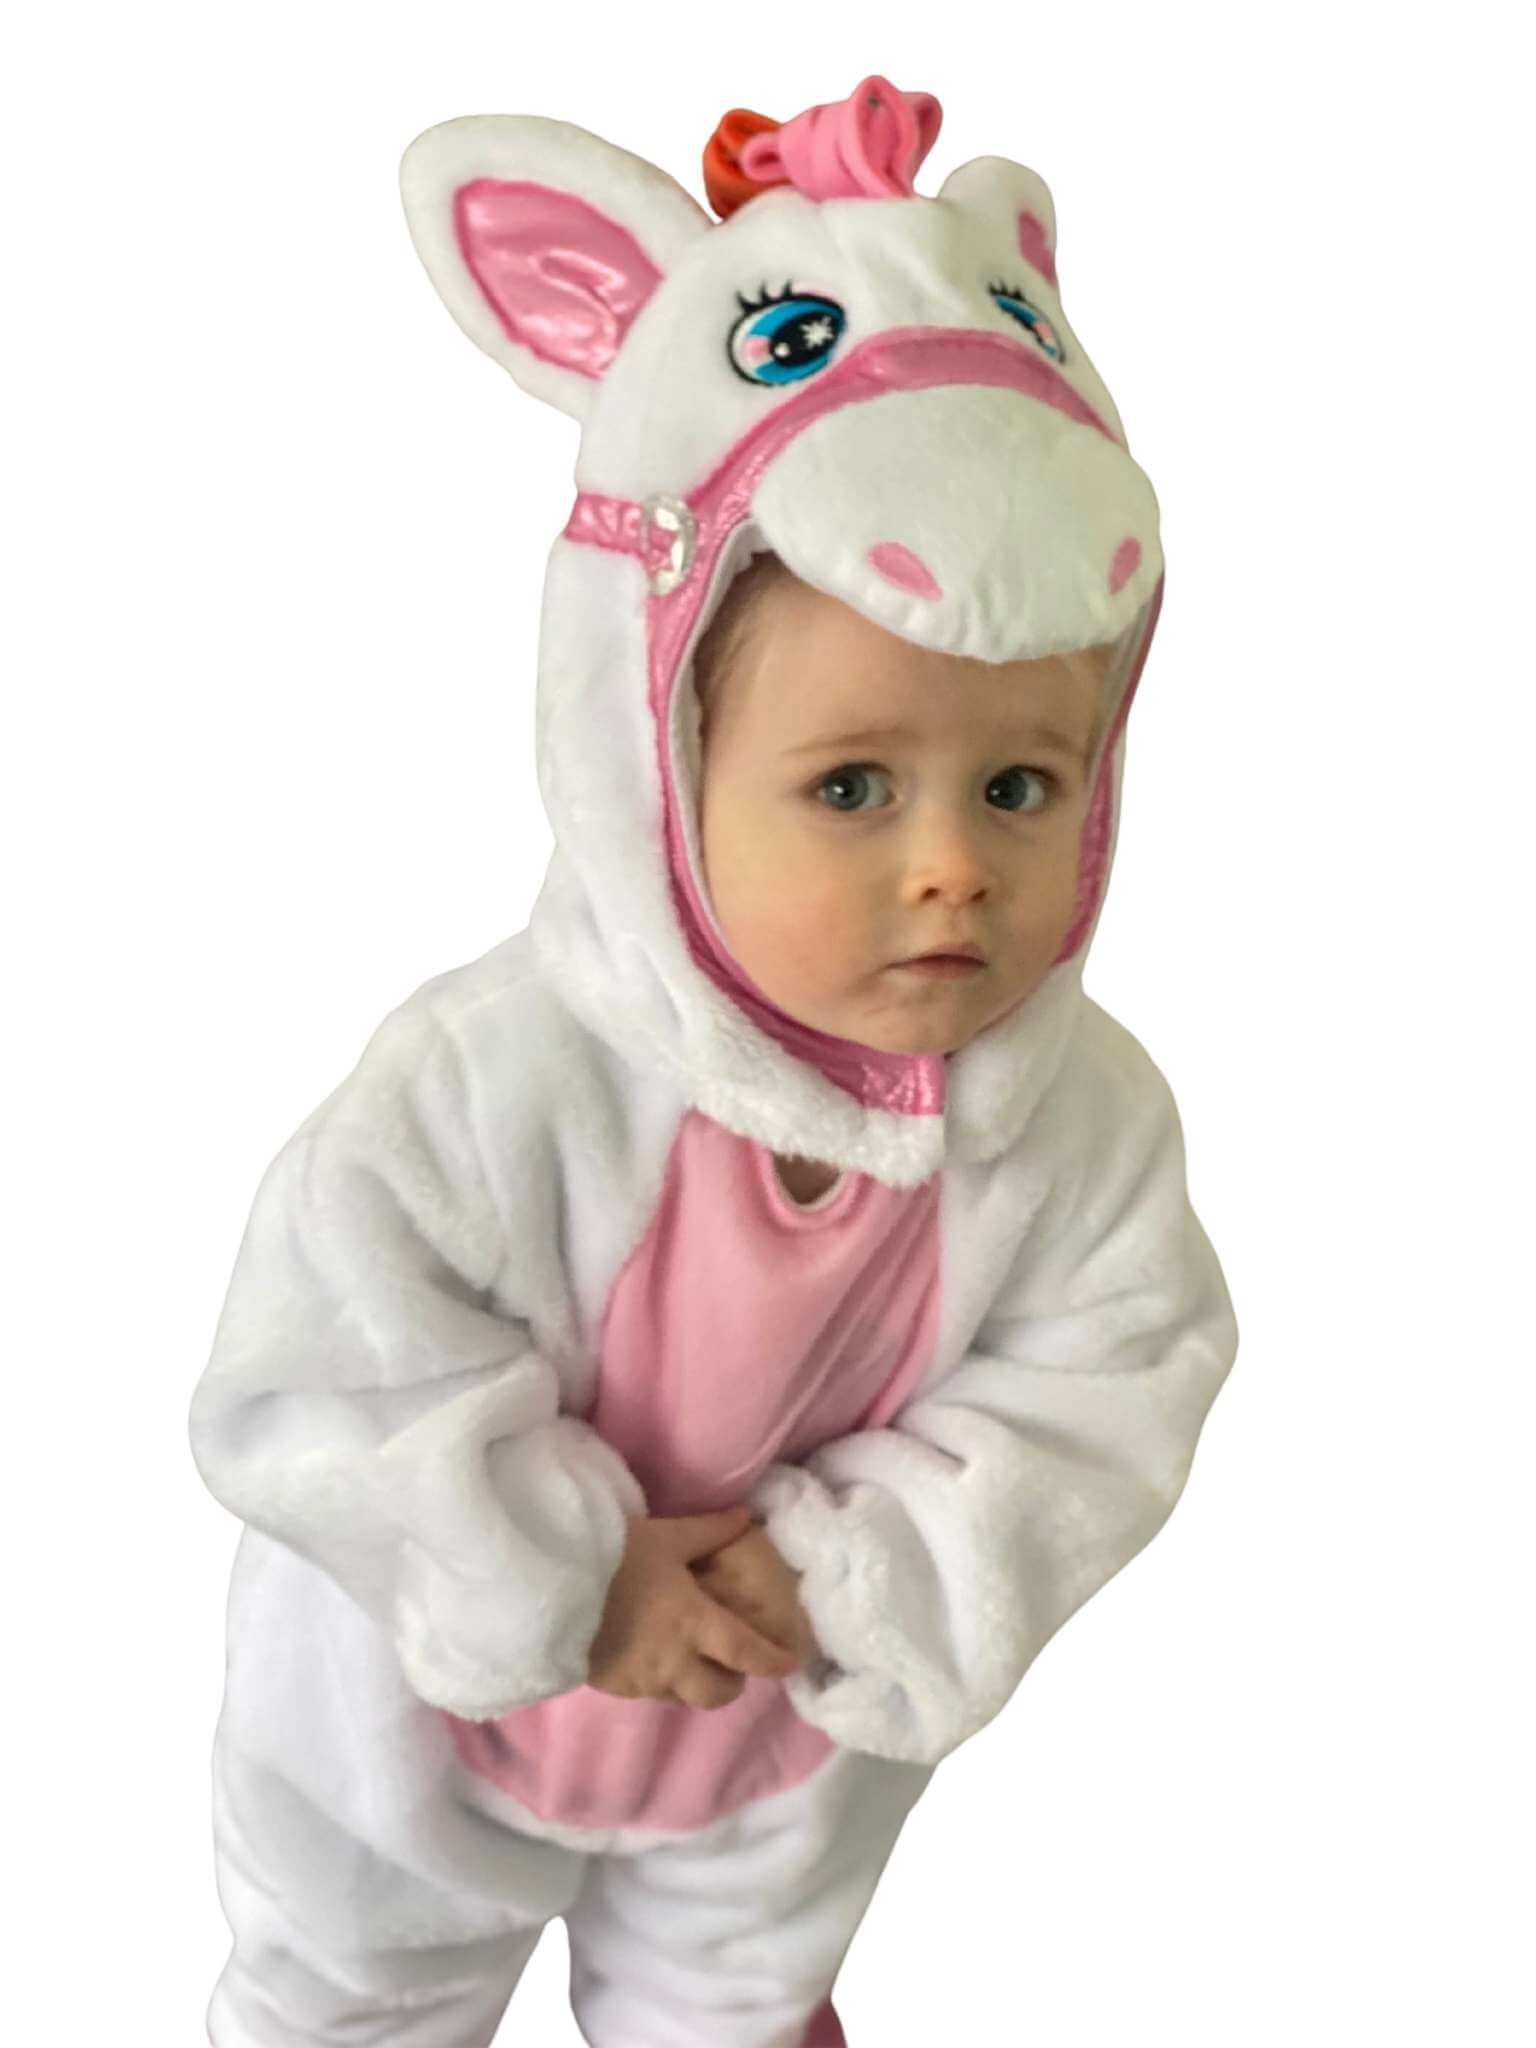 Close up of toddler wearing the Unicorn costume showing the details to the face including ears, eyes, nose and mane.